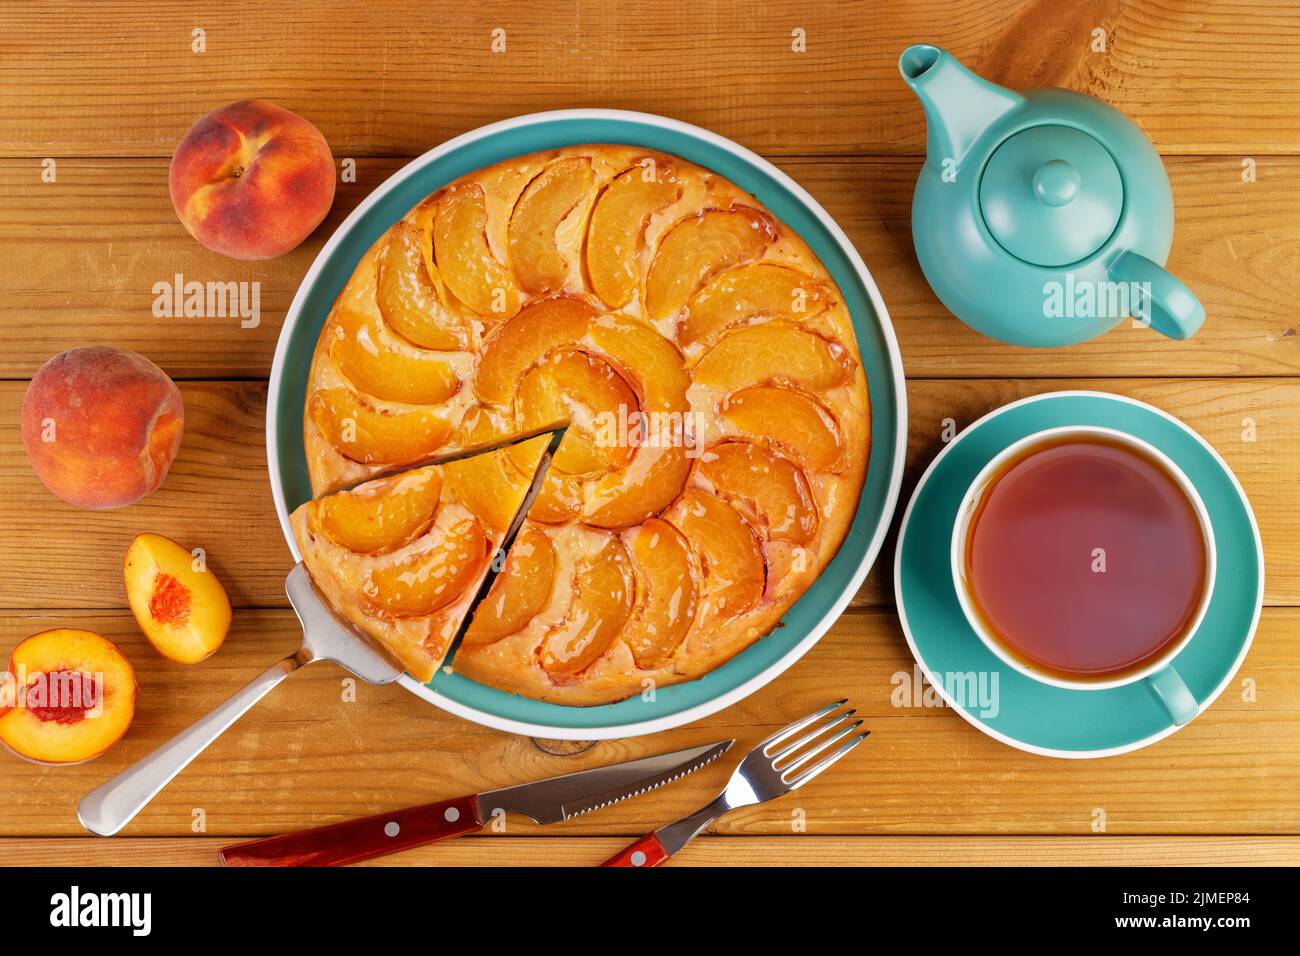 Homemade pie with peaches and cup of tea on wooden table. Top view. Stock Photo